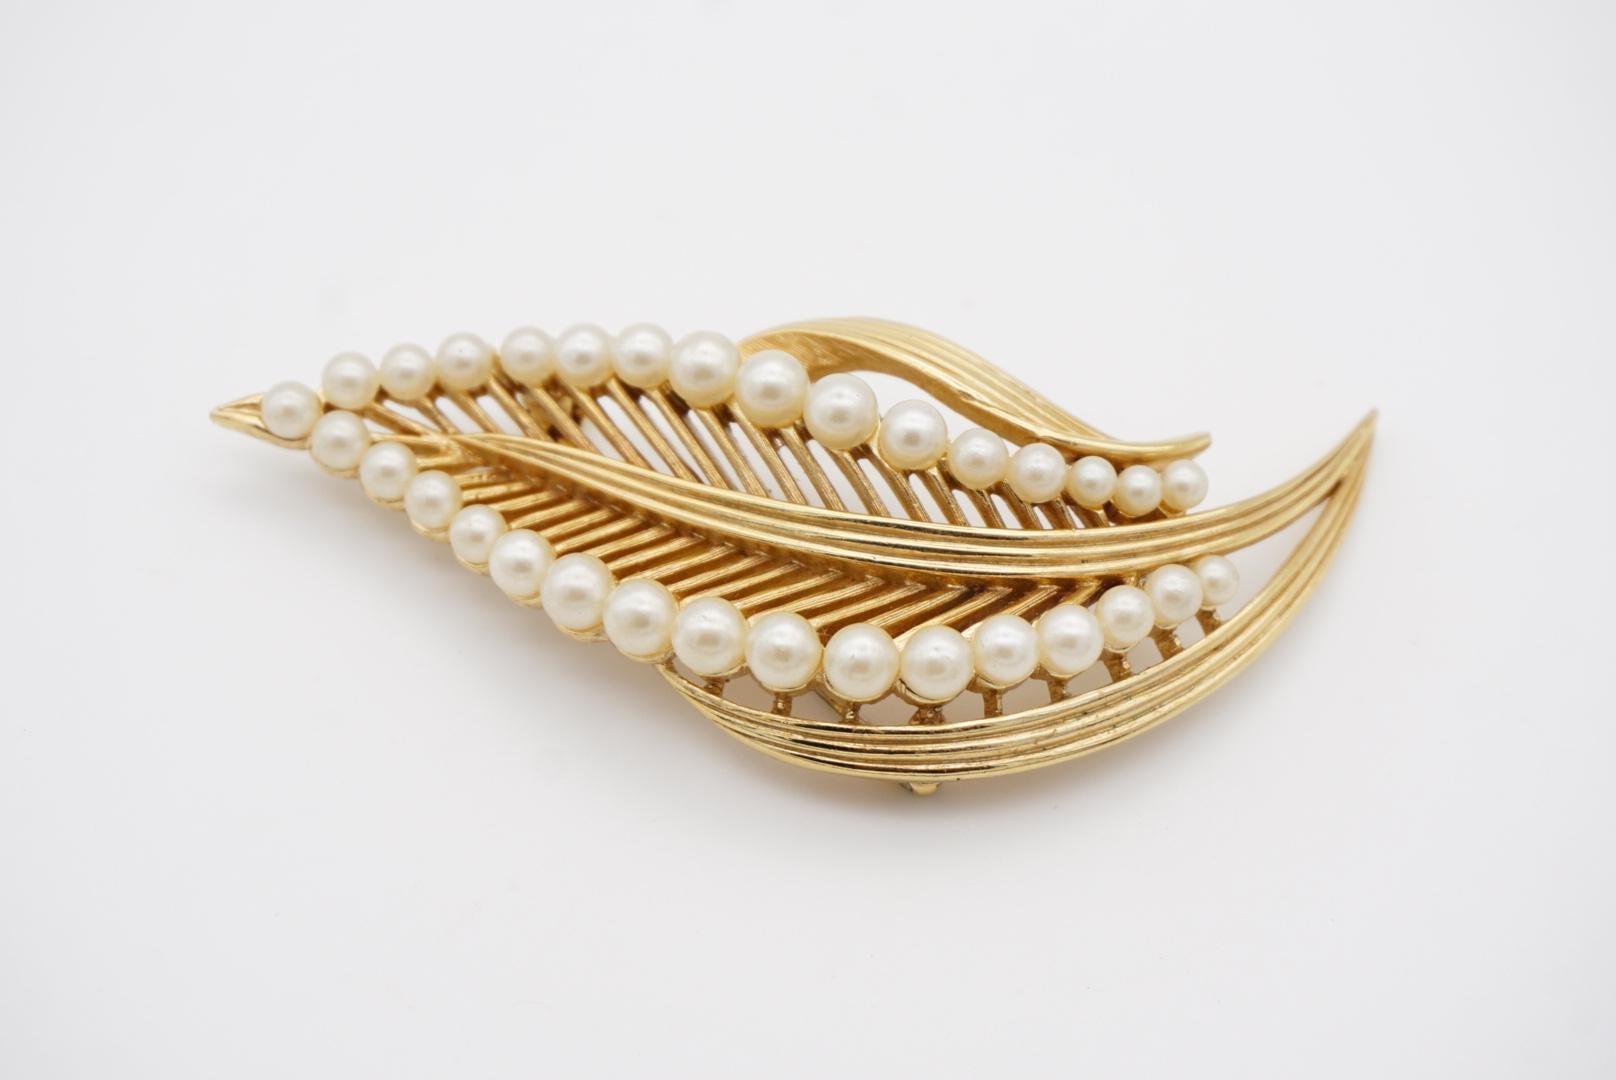 Crown Trifari Vintage 1950s Sway Wind Leaf Reed Wheat Pearls Openwork Brooch In Excellent Condition For Sale In Wokingham, England